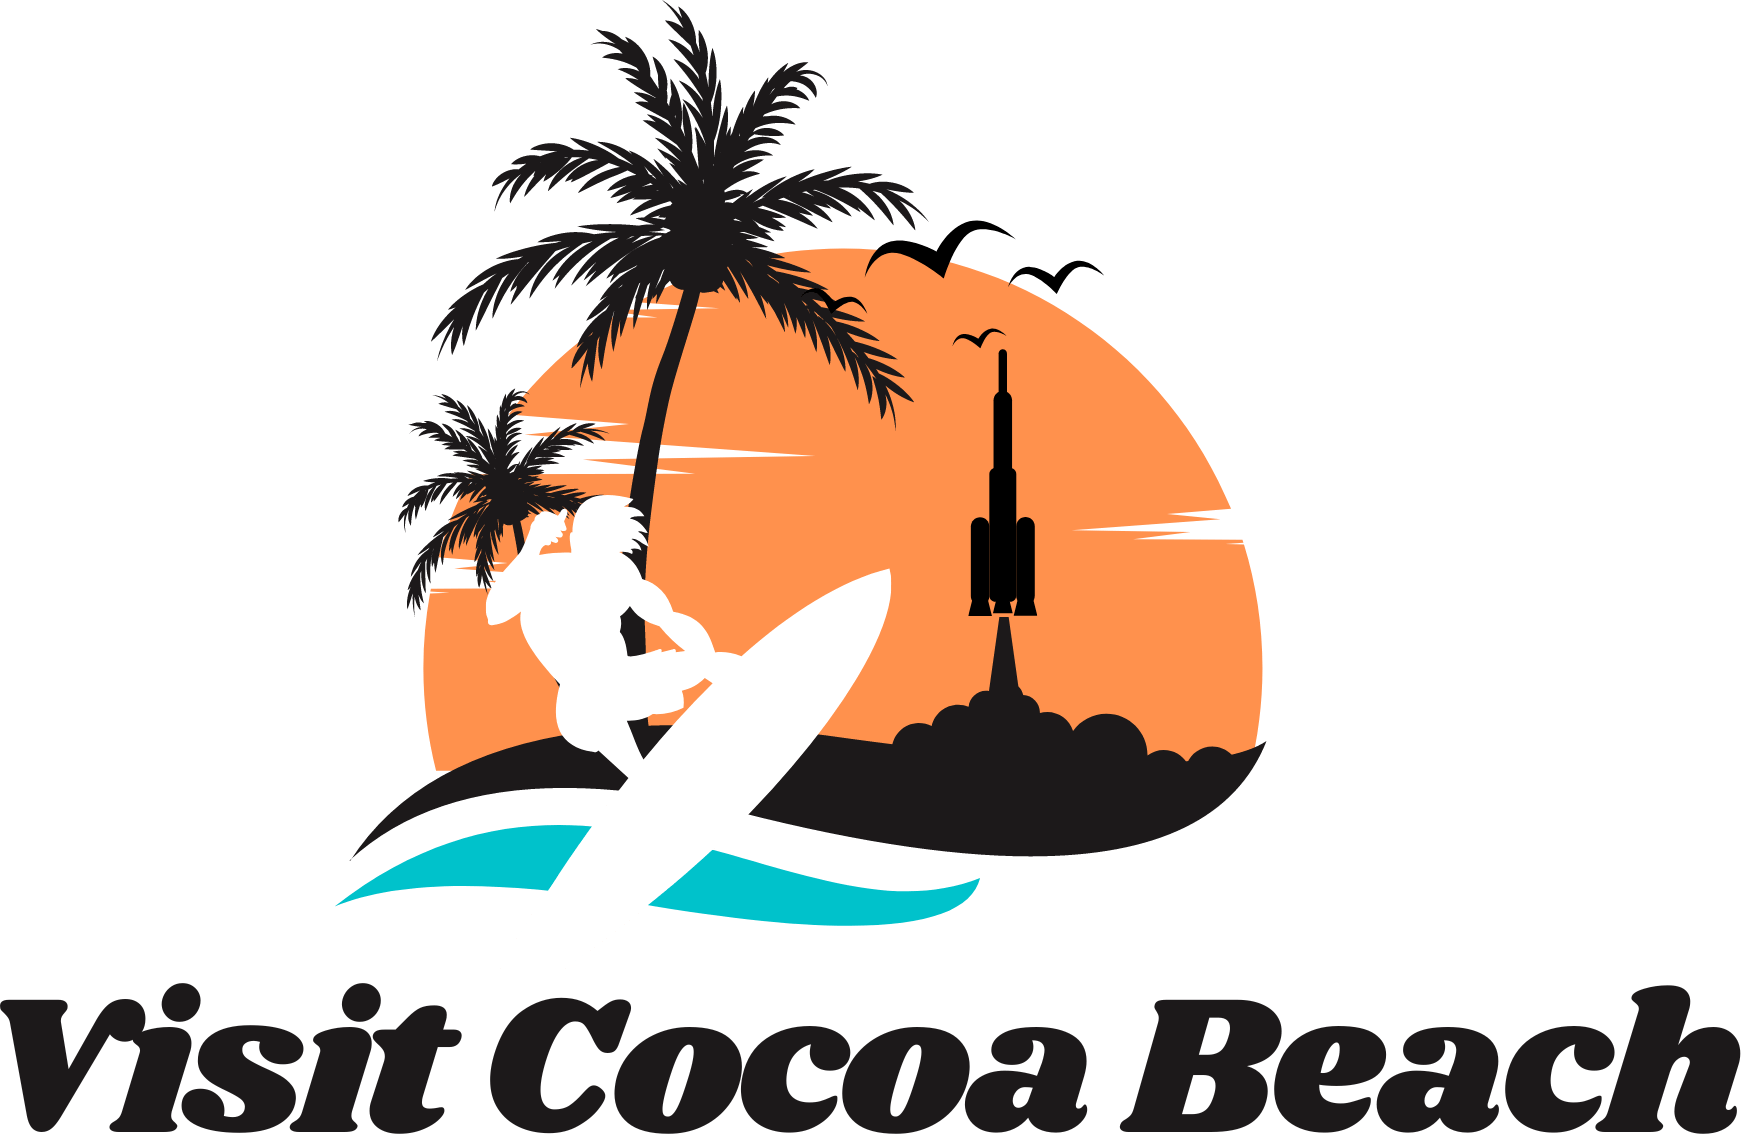 Tourism - Cocoa Beach Regional Chamber of Commerce